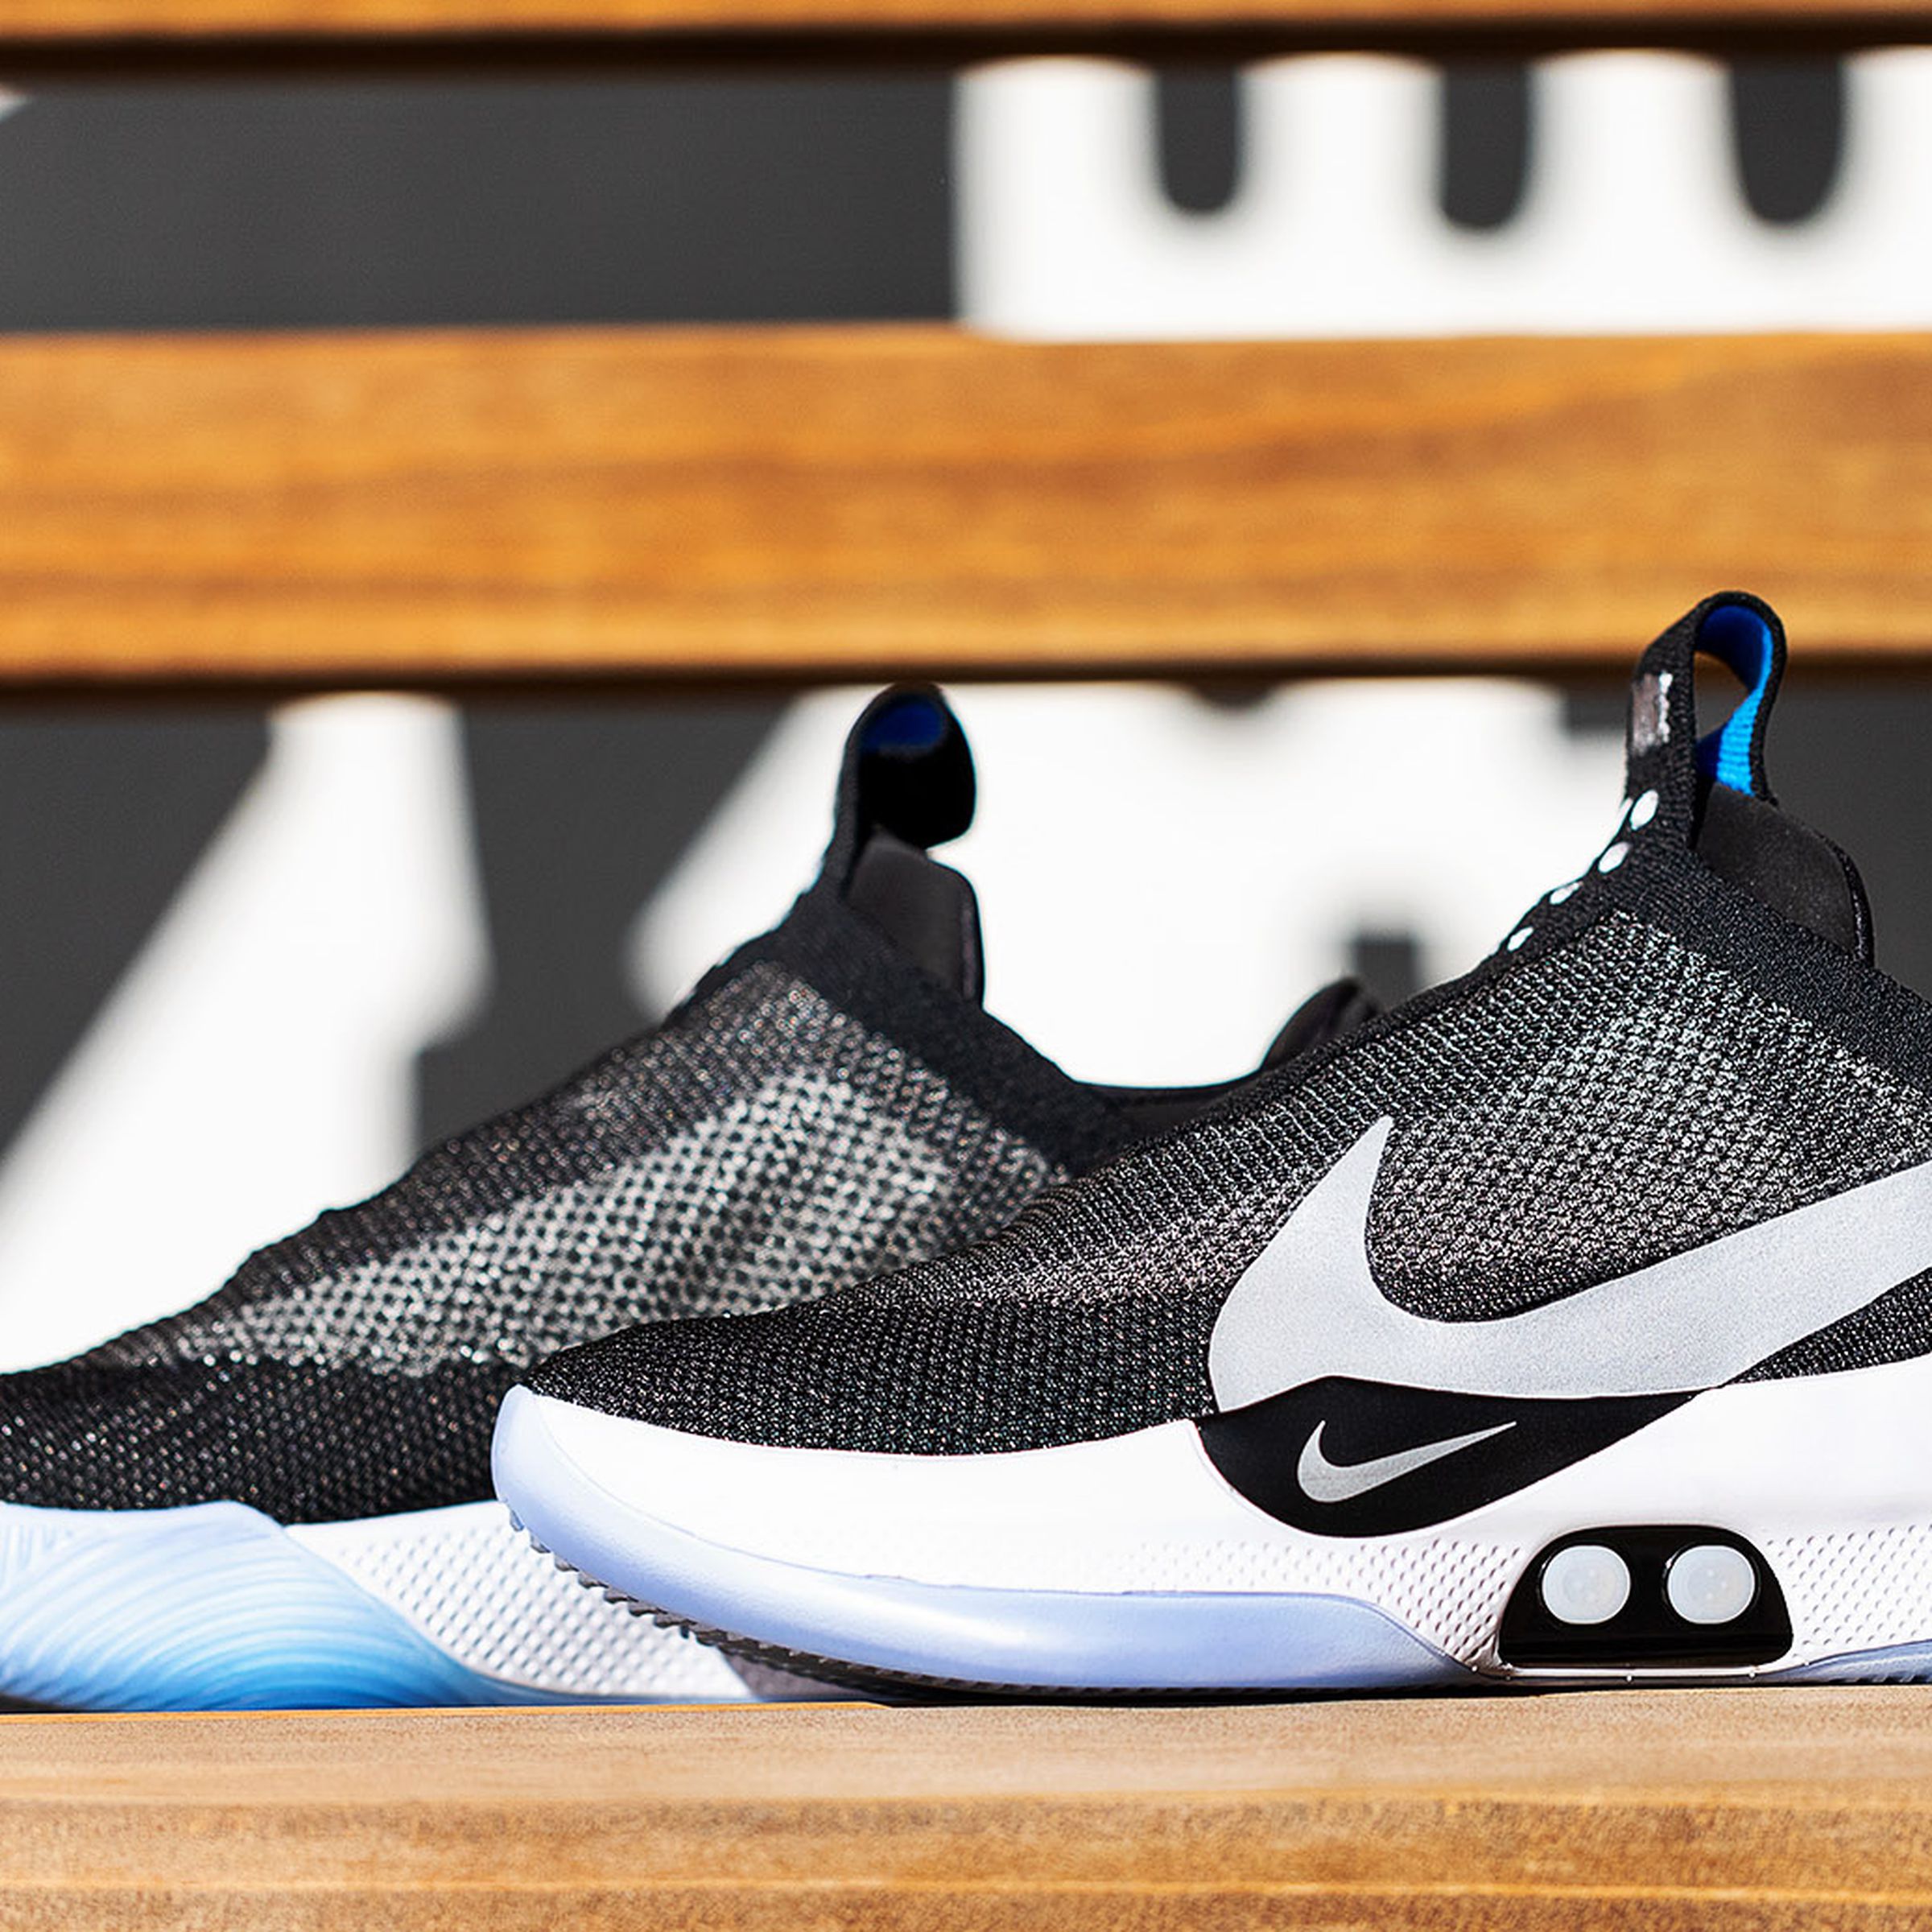 The Nike Adapt BB self-lacing basketball sneakers on a bench.